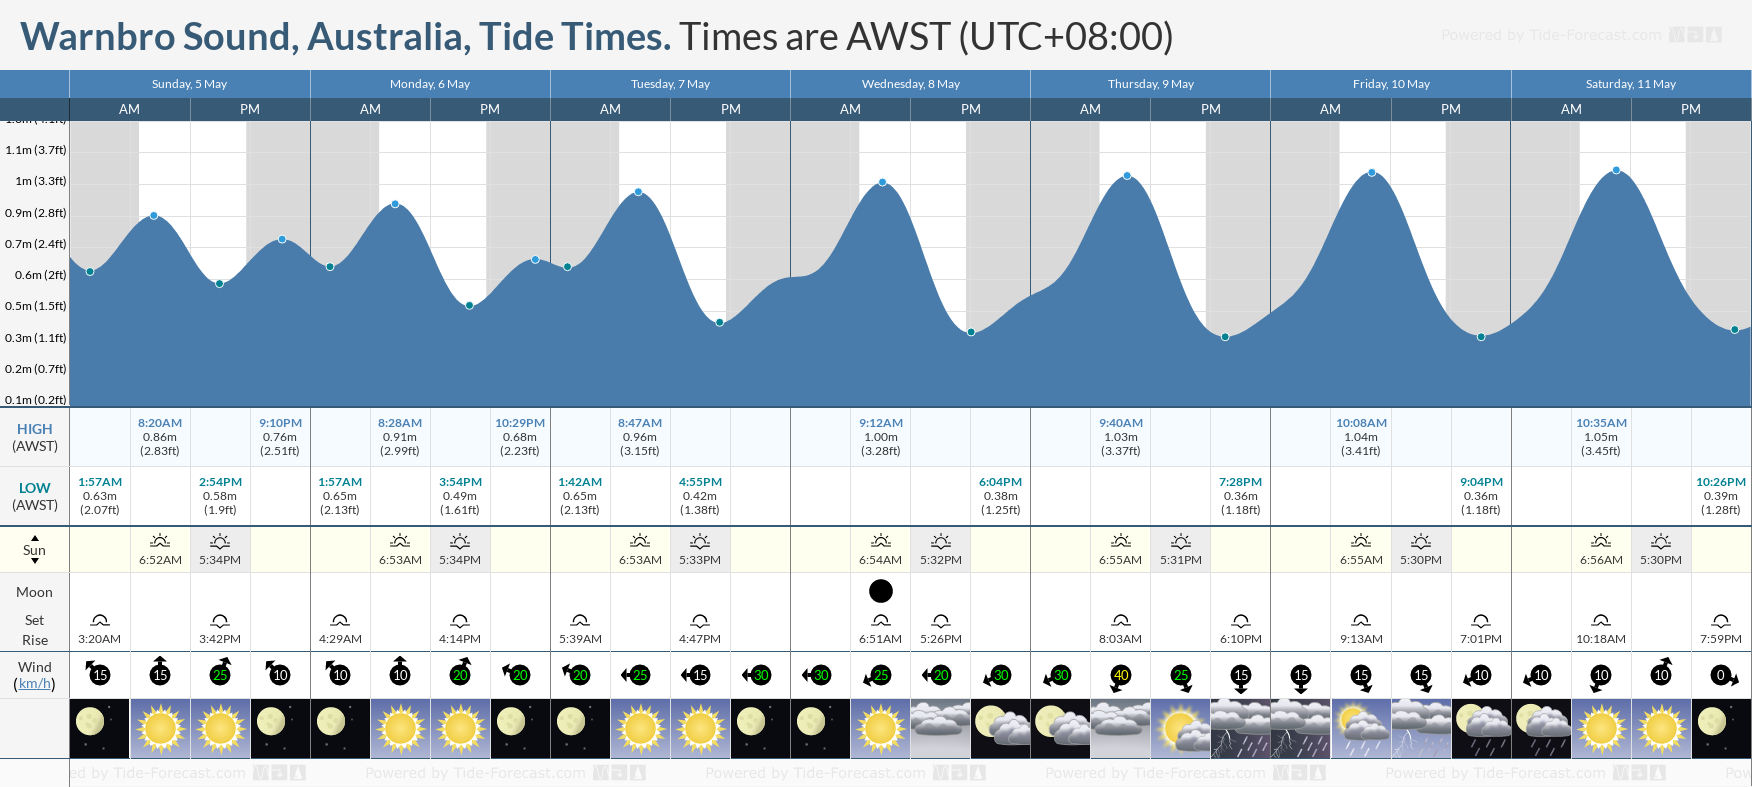 Warnbro Sound, Australia Tide Chart including high and low tide tide times for the next 7 days